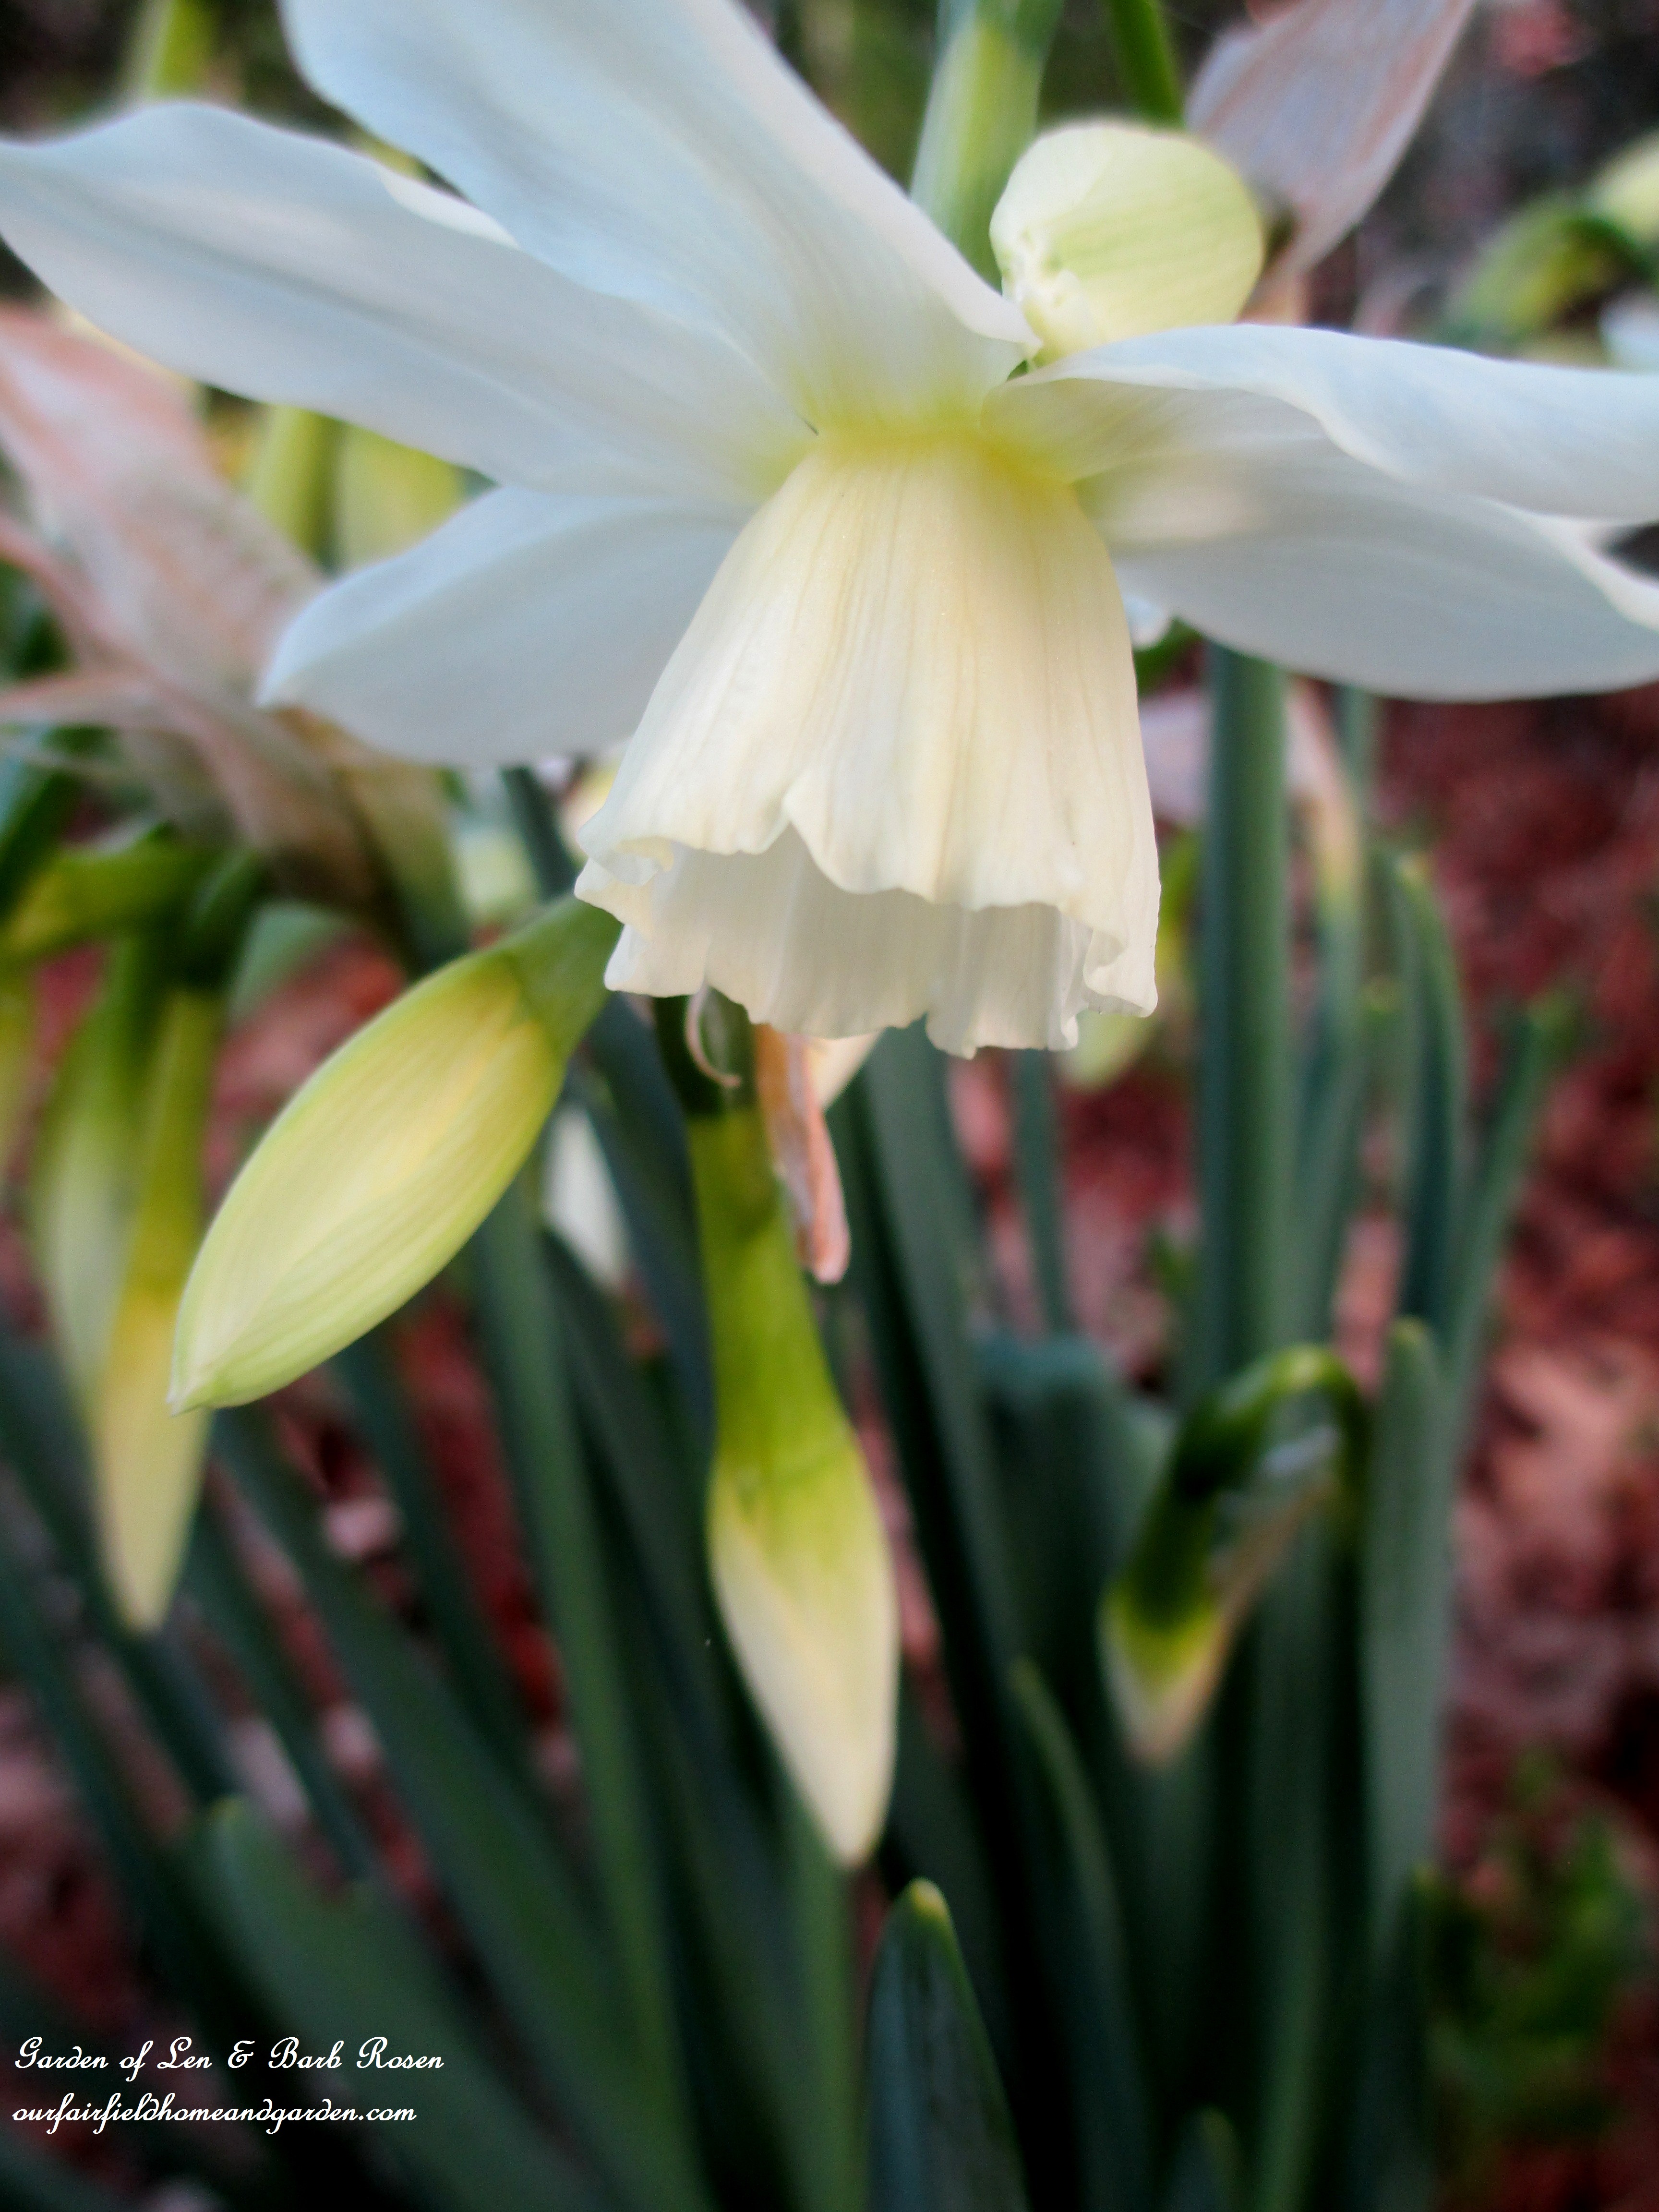 narcissus "Thalia" https://ourfairfieldhomeandgarden.com/signs-of-spring-at-our-fairfield-home-garden/